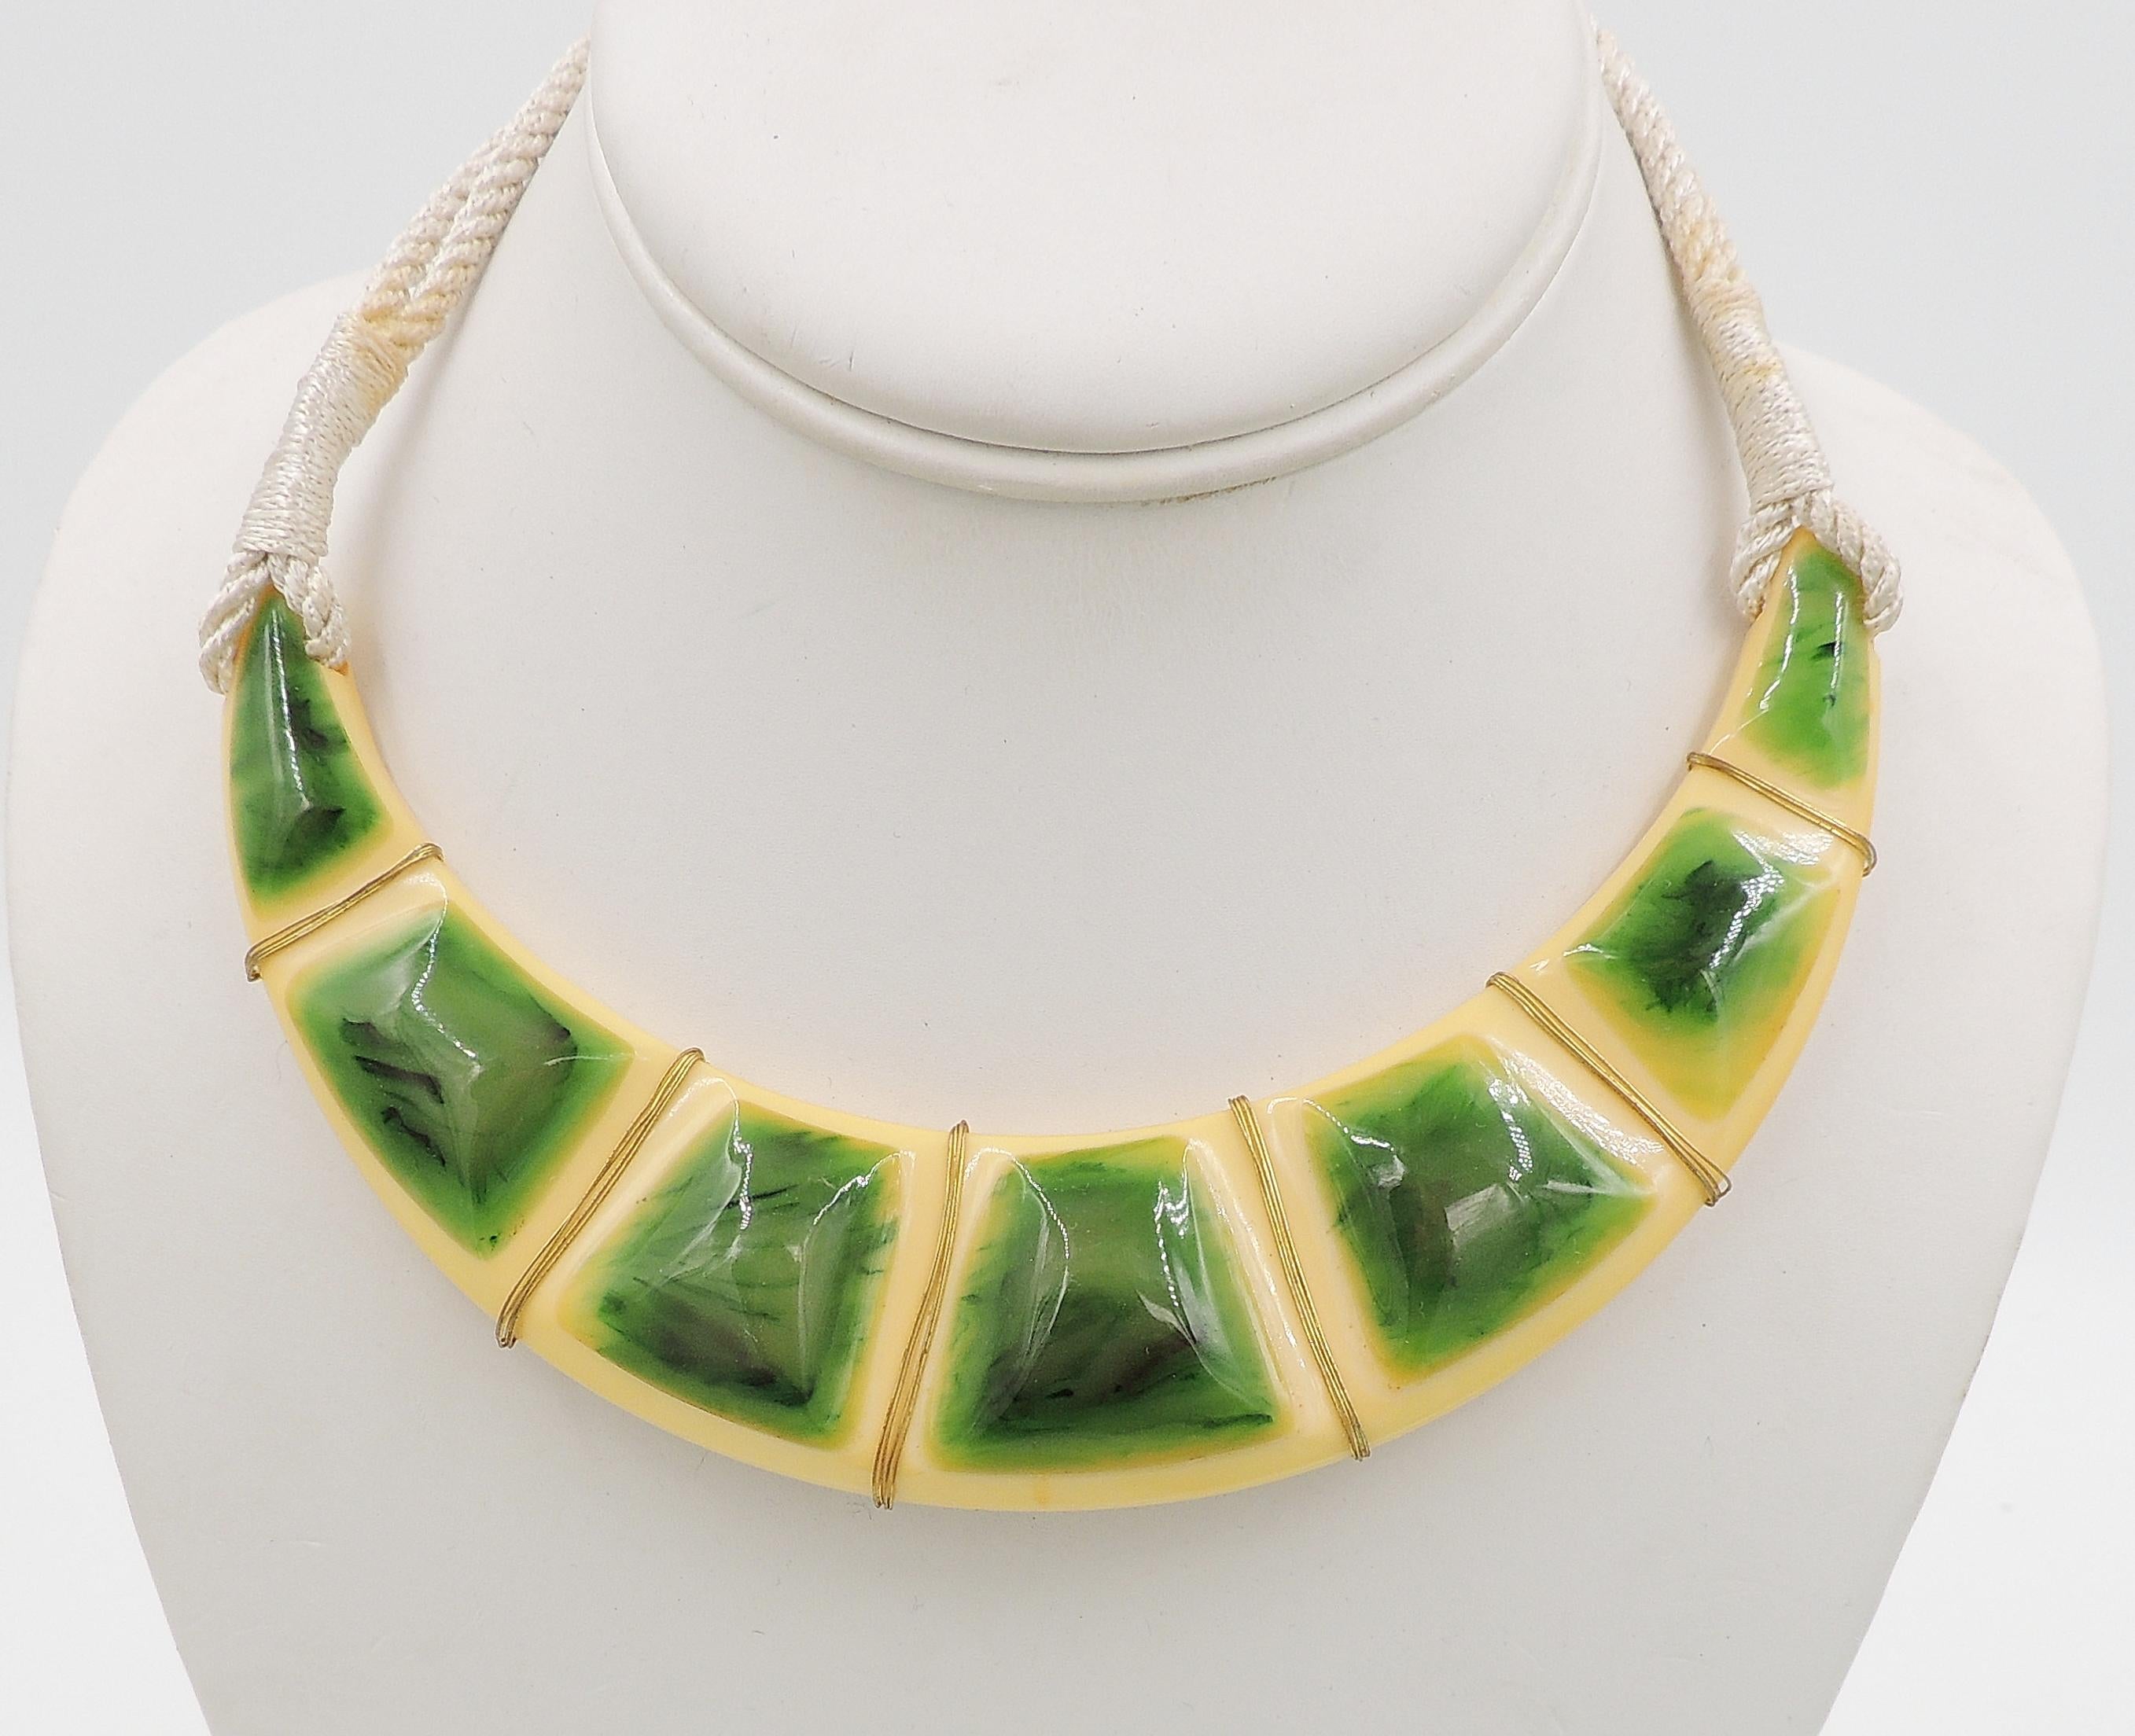 Vintage 1970s Signed Valentino Wrapped Green & Ivory Lucite Collar Necklace For Sale 3